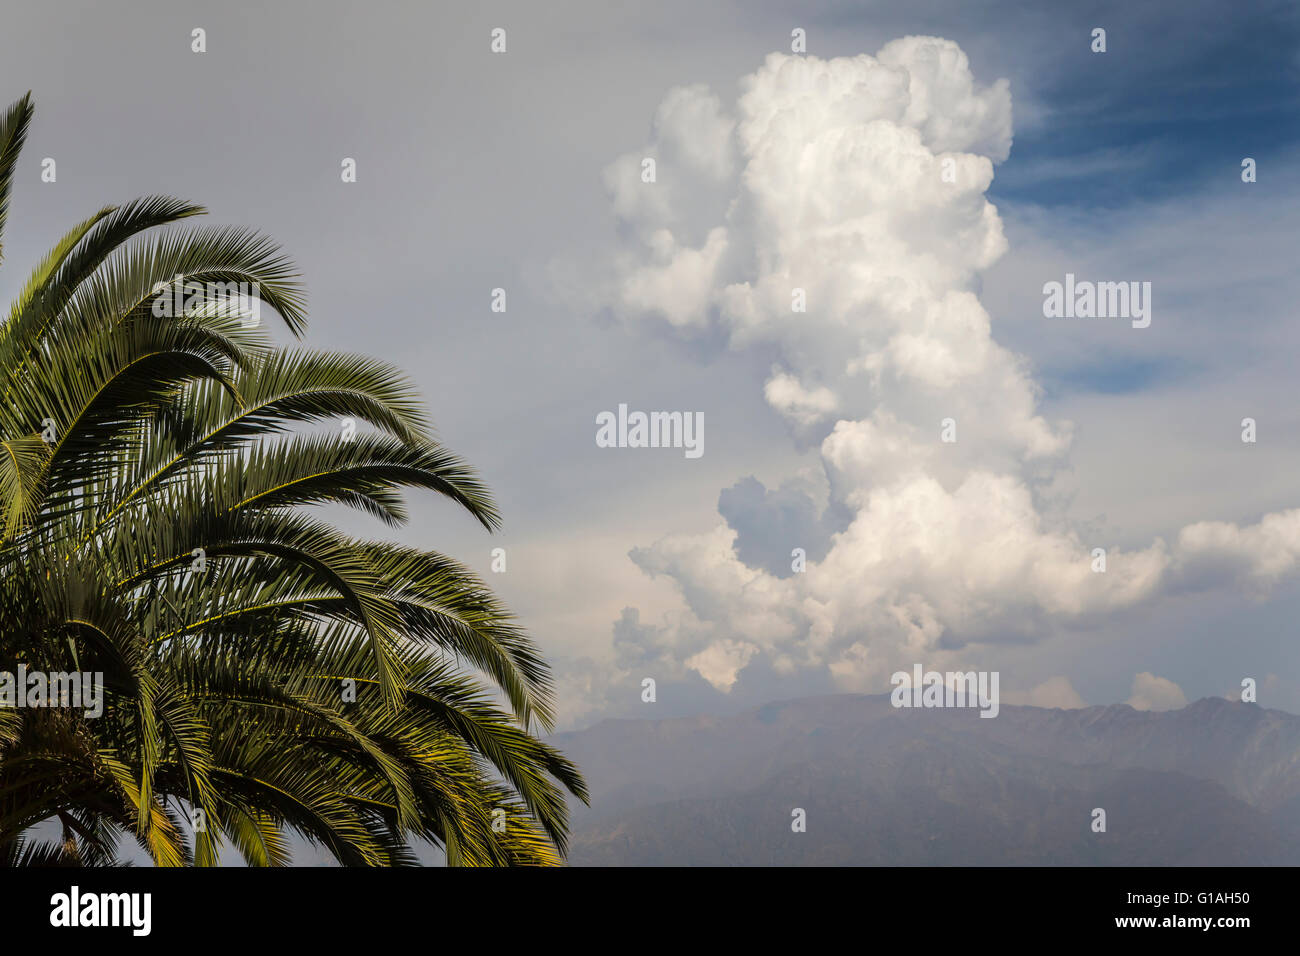 Storm clouds over the Andes Mountains near Santiago, Chile, South America. Stock Photo